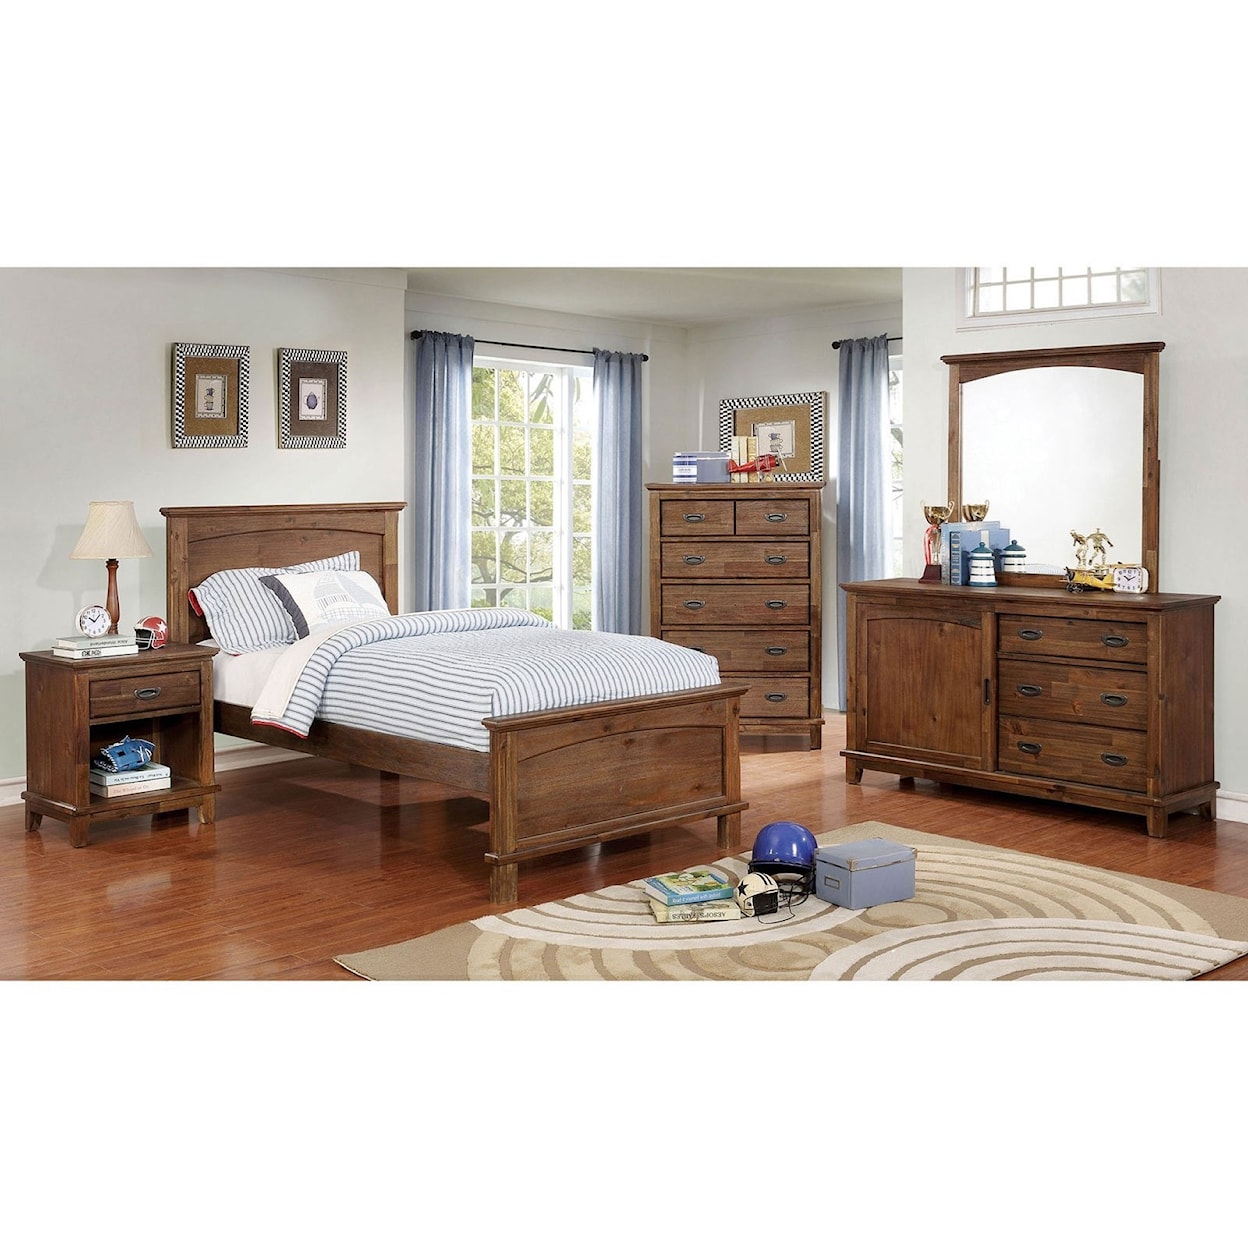 Furniture of America Colin Full Bedroom Group